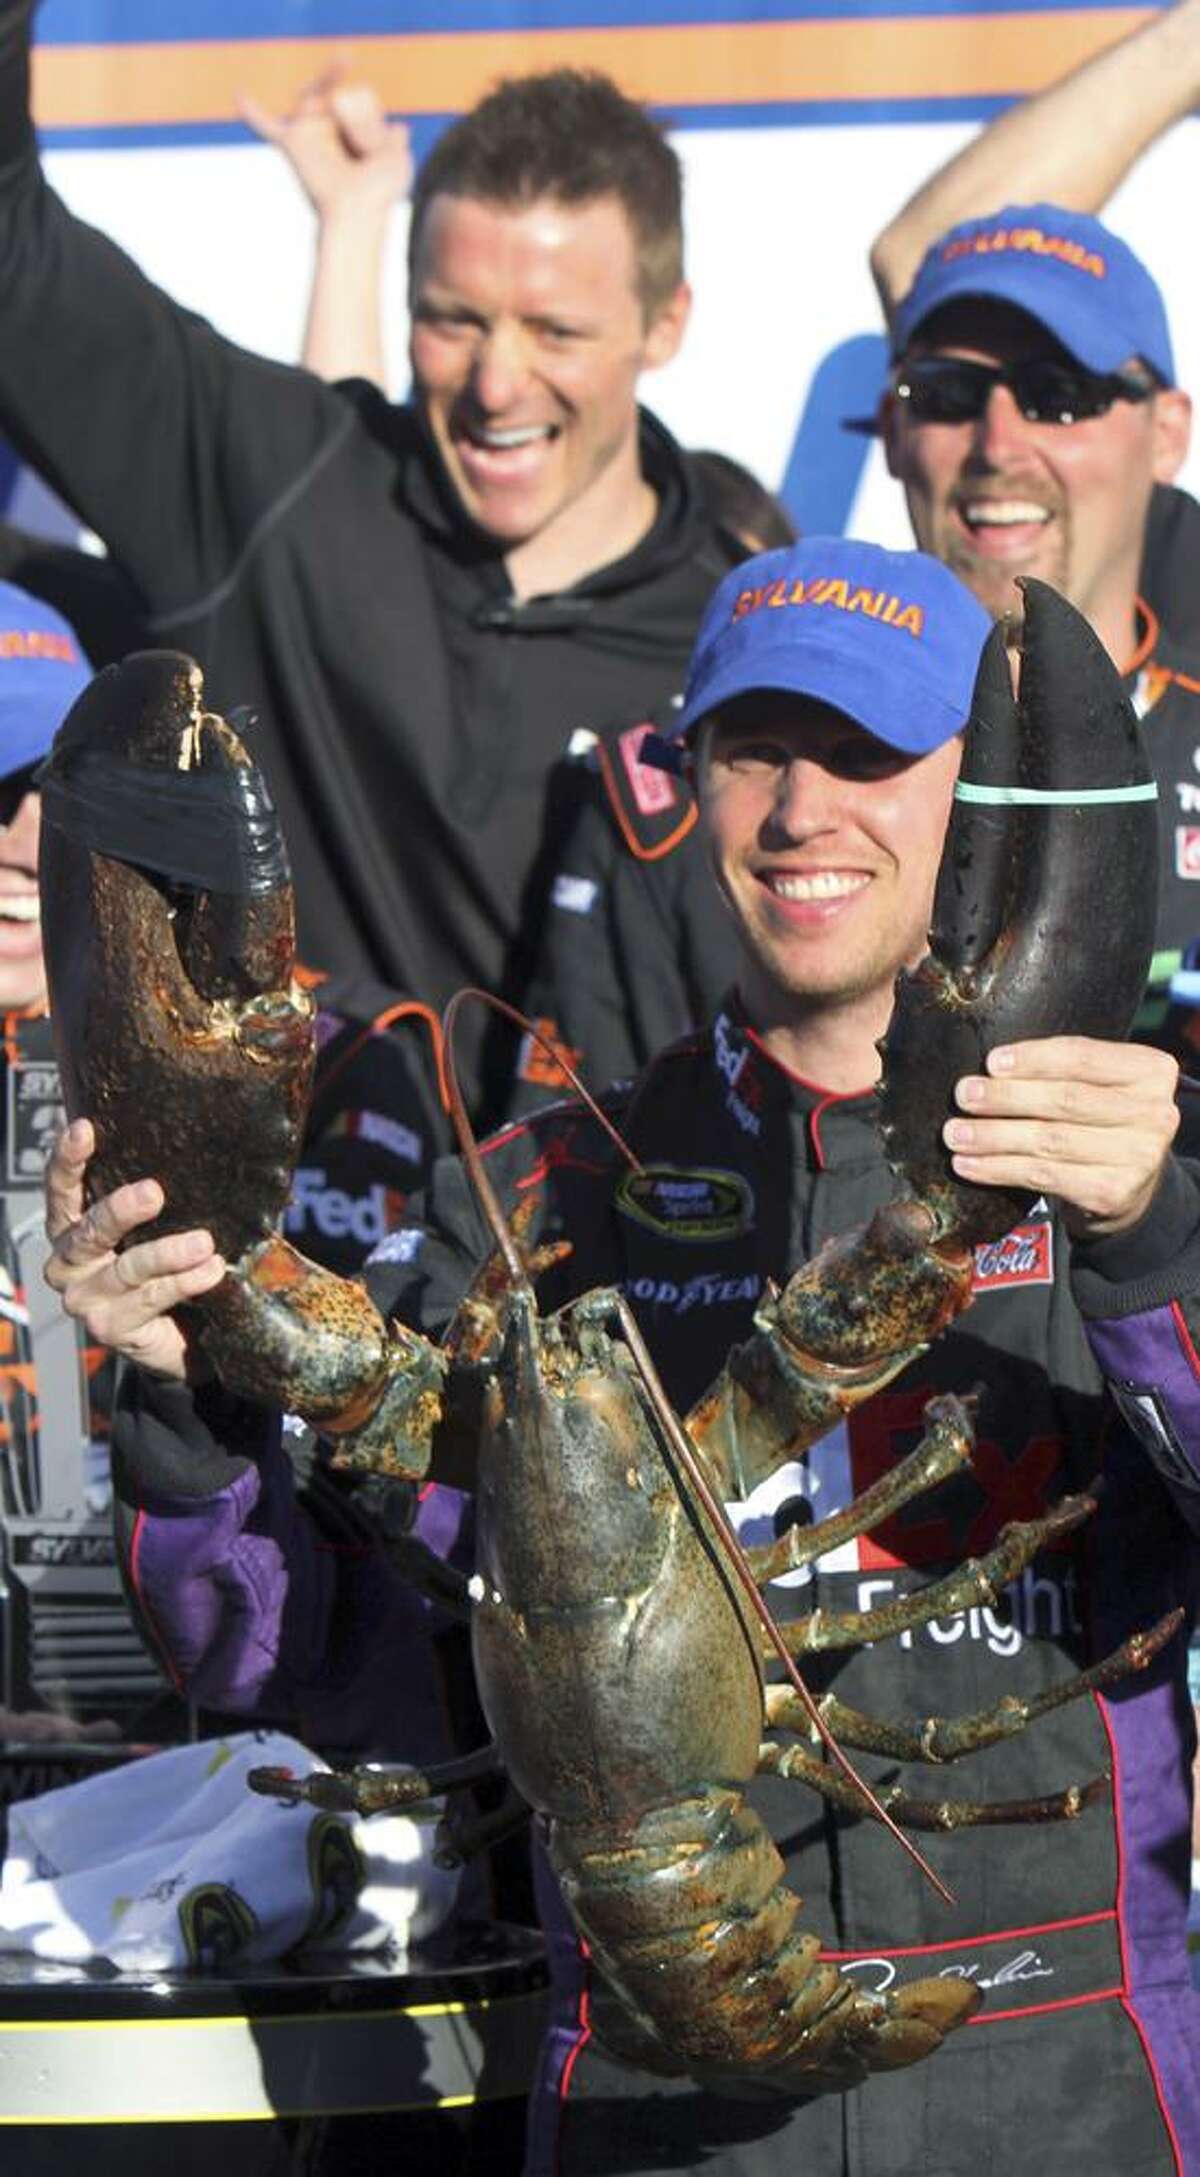 Denny Hamlin holds up a lobster in victory lane after winning the NASCAR Sprint Cup Series auto race at New Hampshire Motor Speedway, Sunday, Sept. 23, 2012, in Loudon, N.H. (AP Photo/Jim Cole)